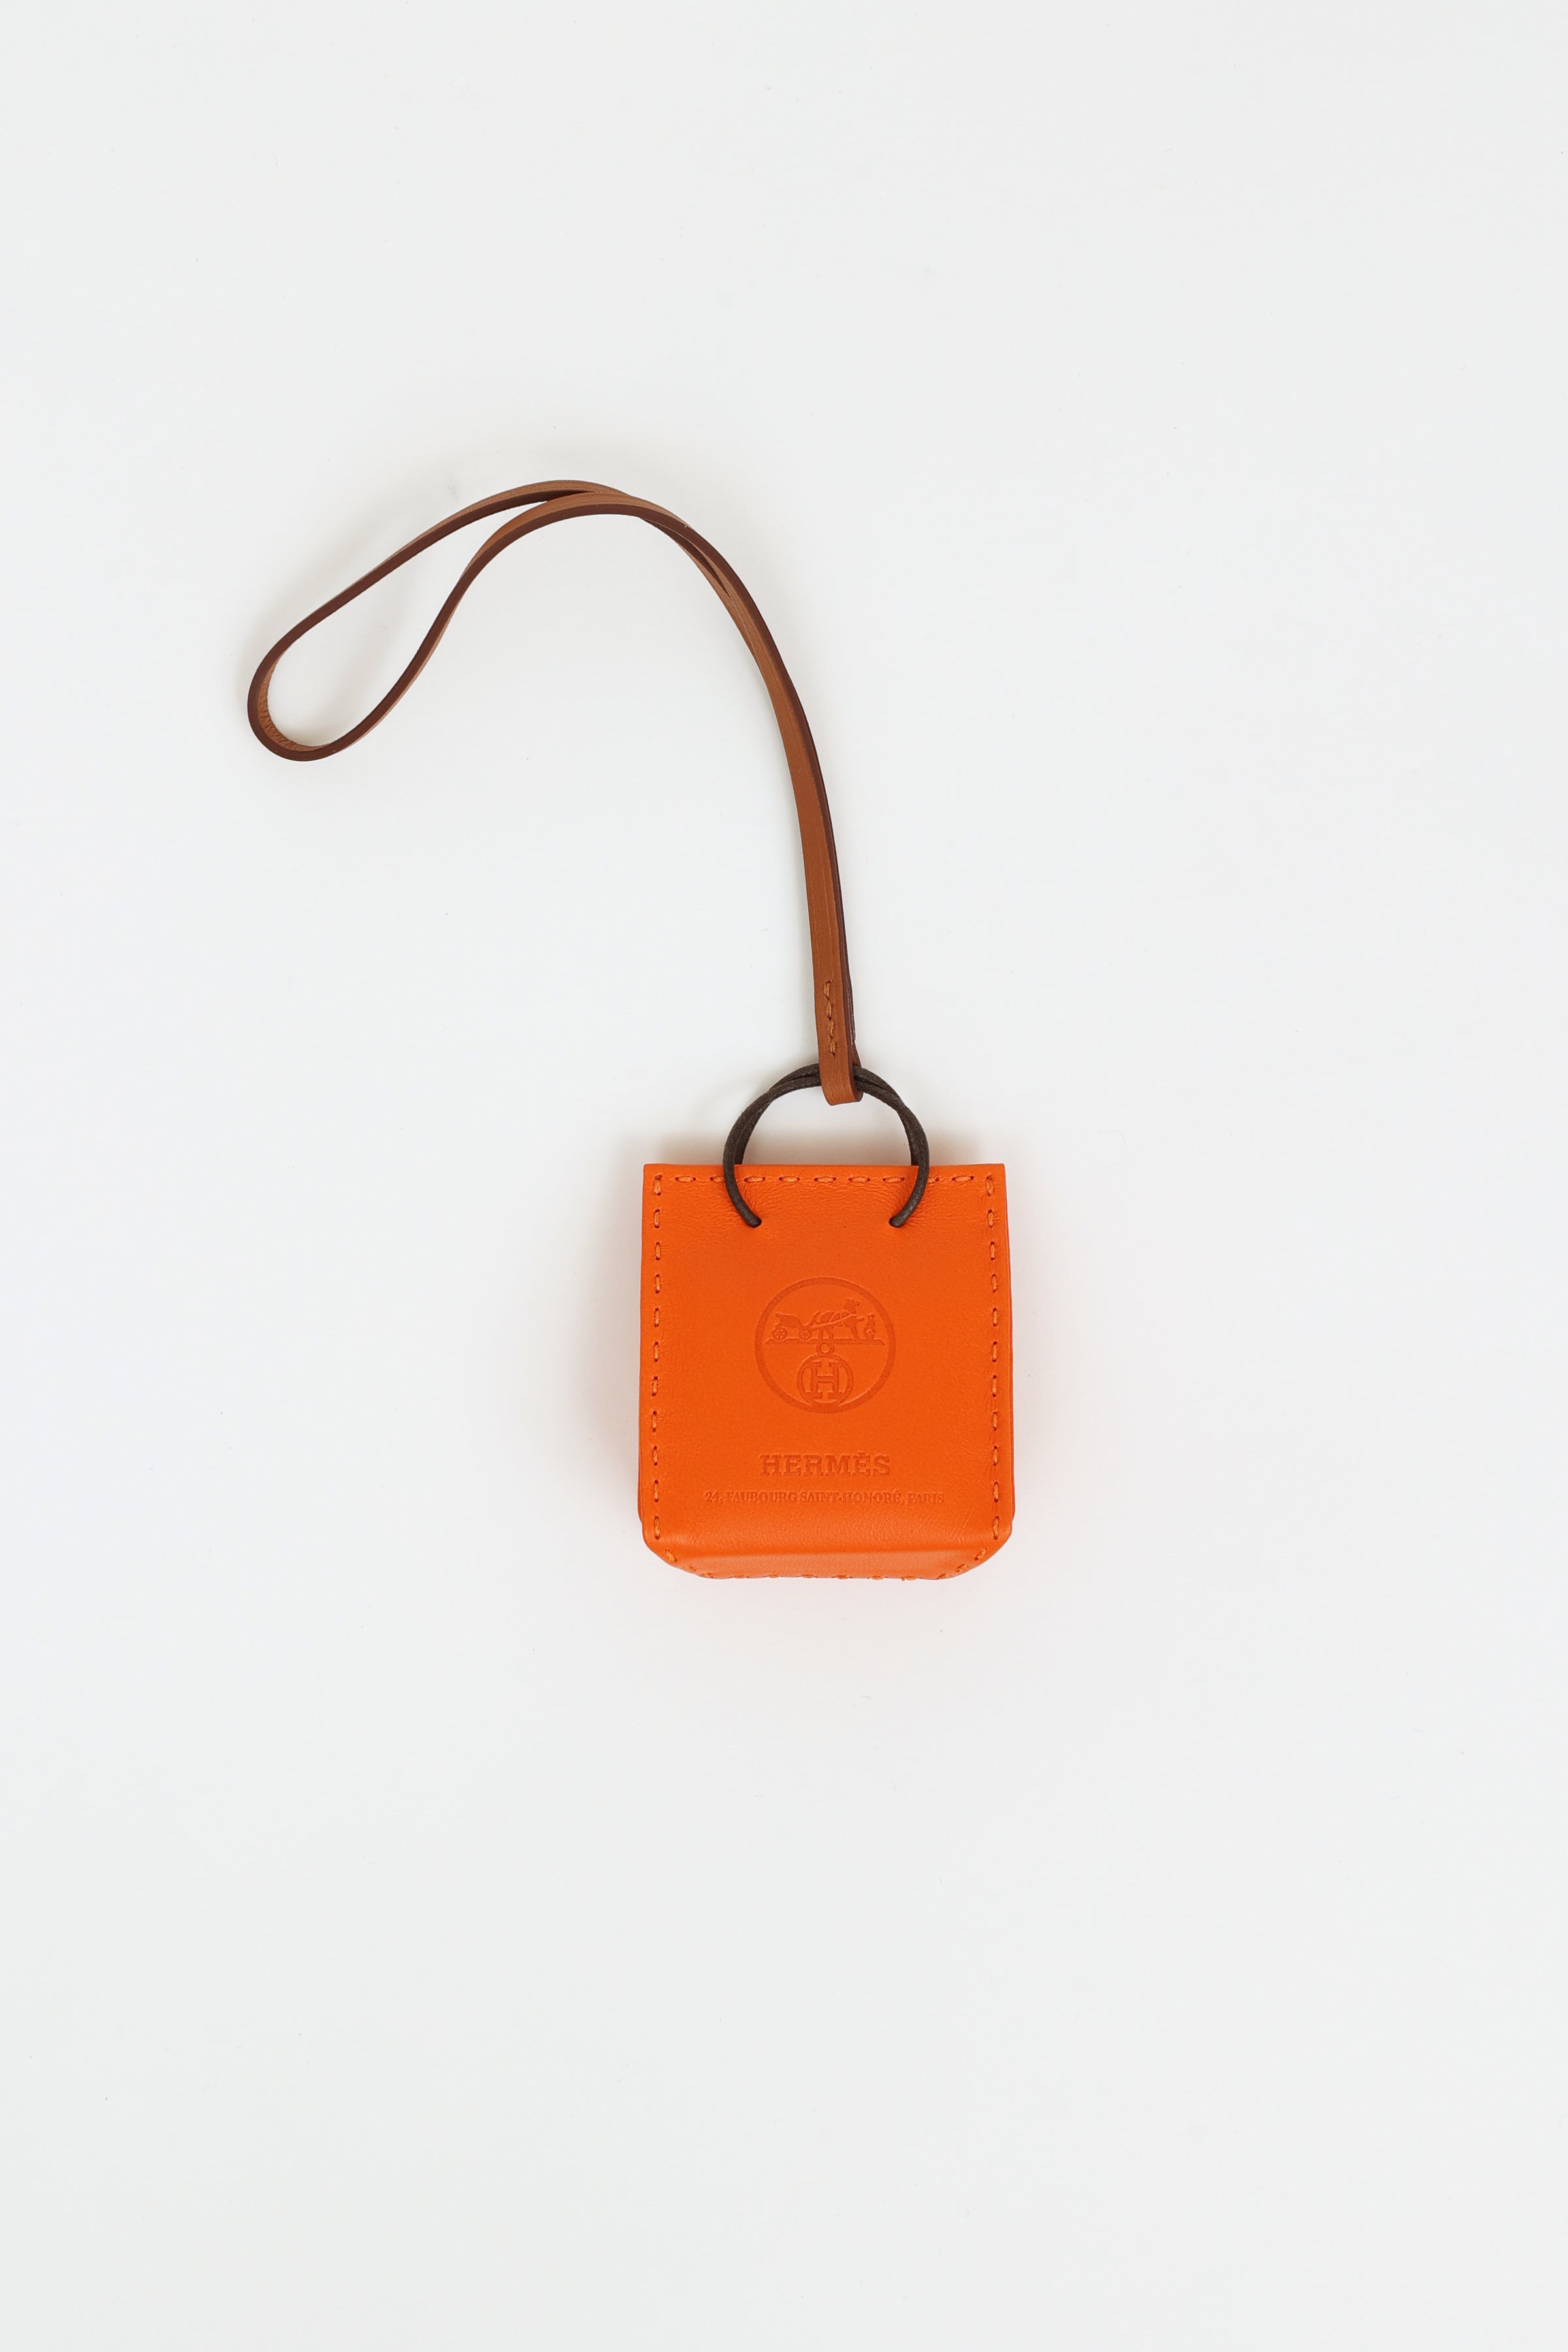 Hermes bag charm, Luxury, Accessories on Carousell